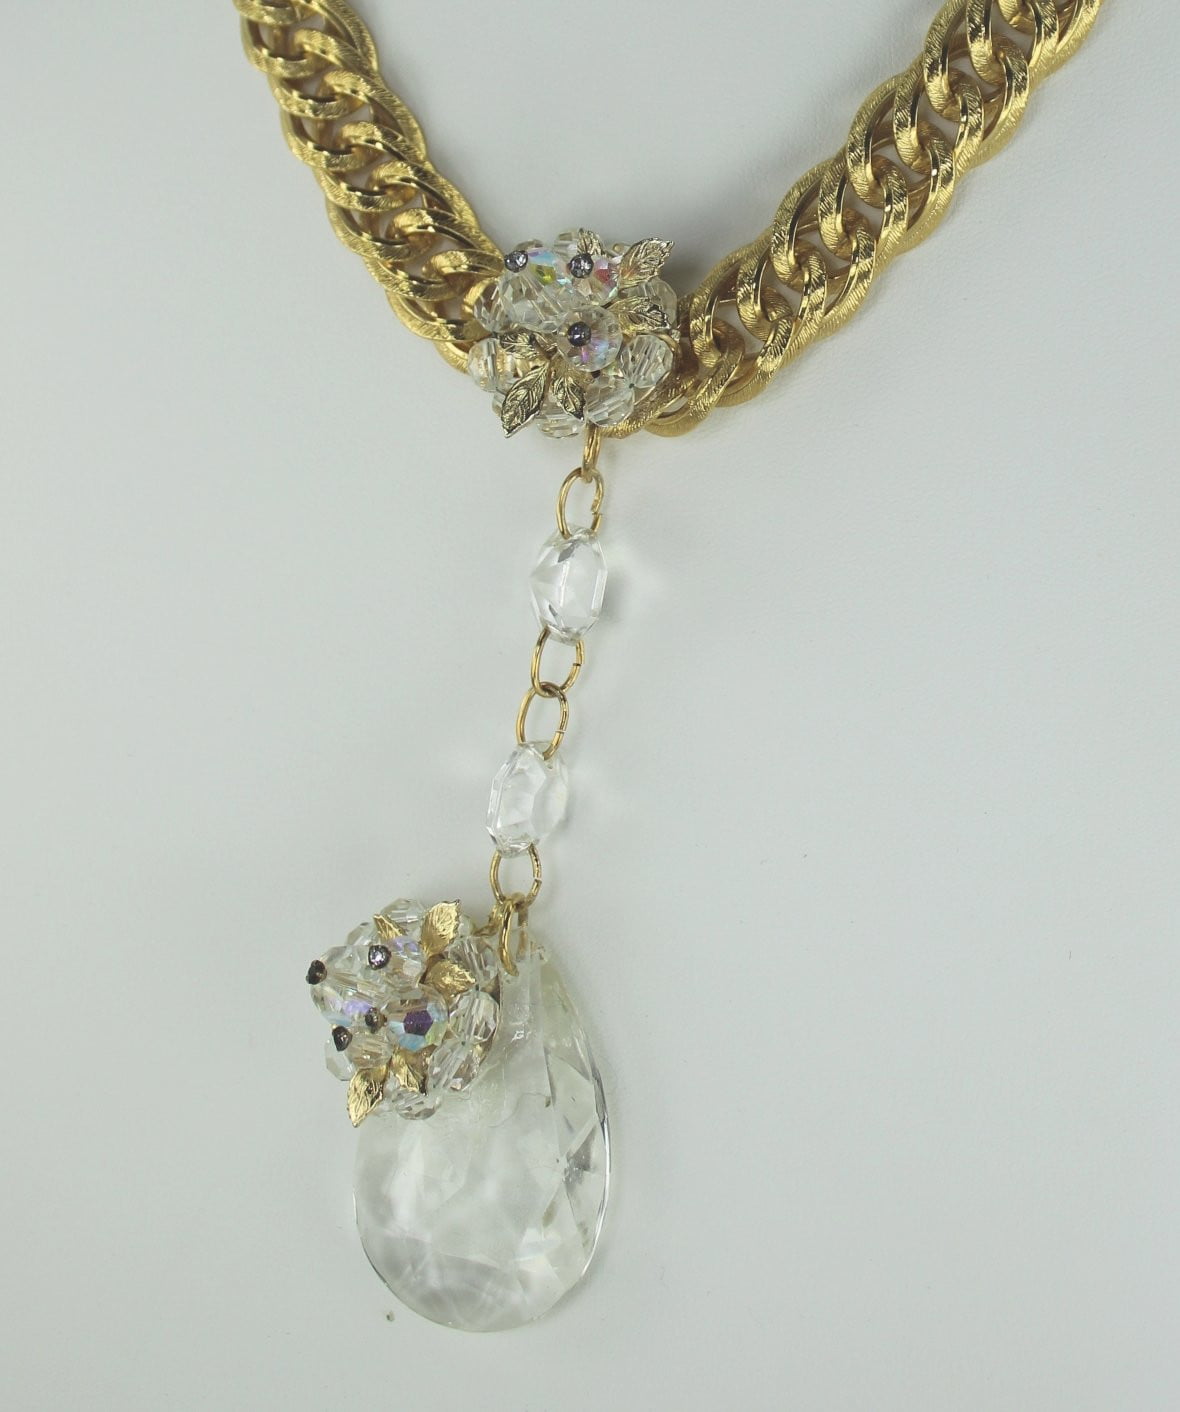 Vintage New Prism Necklace Patzi Re-Design RS Heavy Gold Tone Chain special occasion